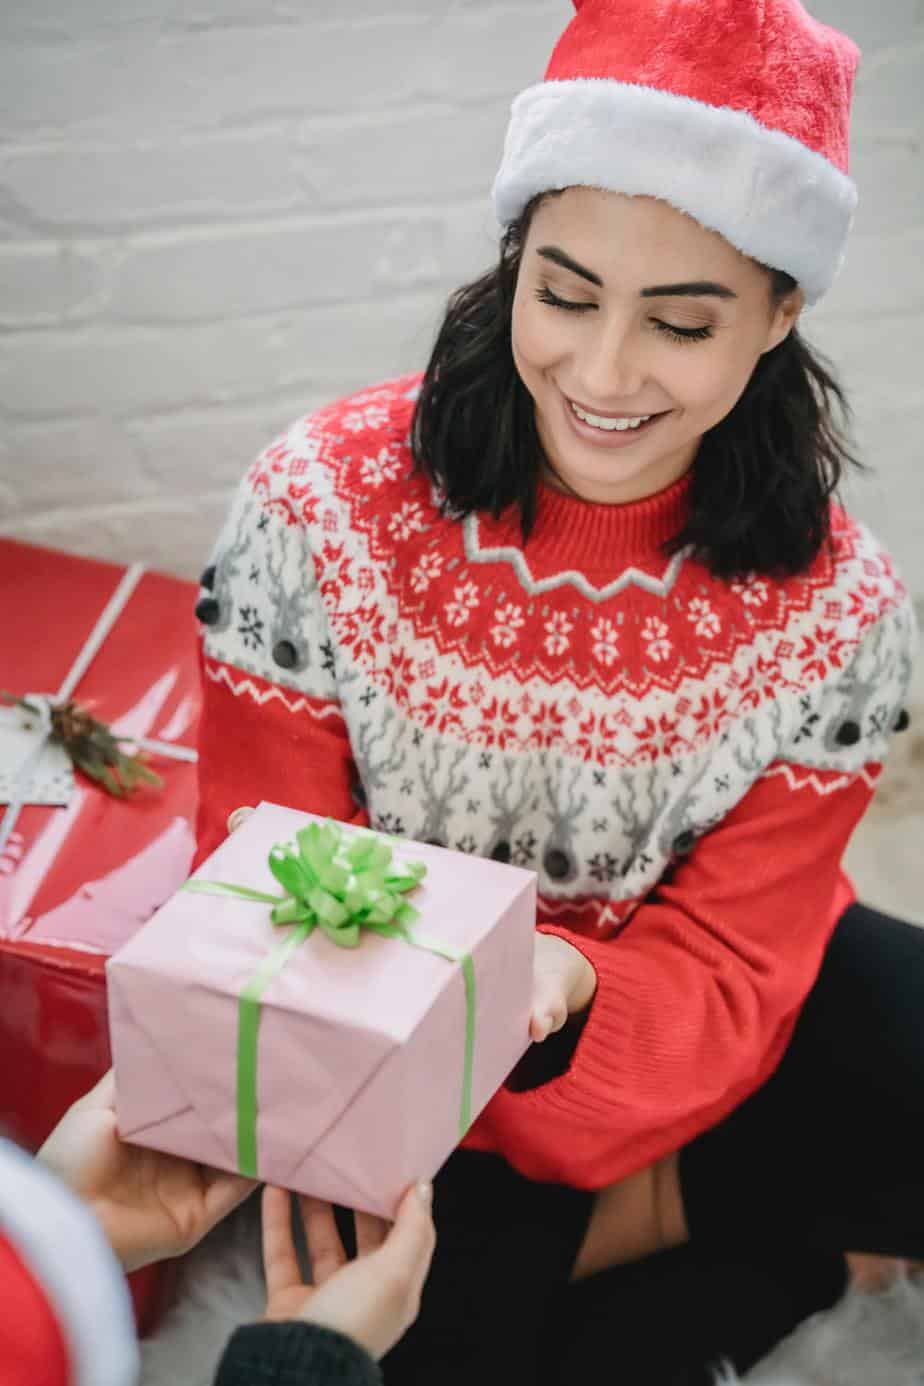 Best Gift Ideas For Your Girlfriend Under $50 That She’ll Love